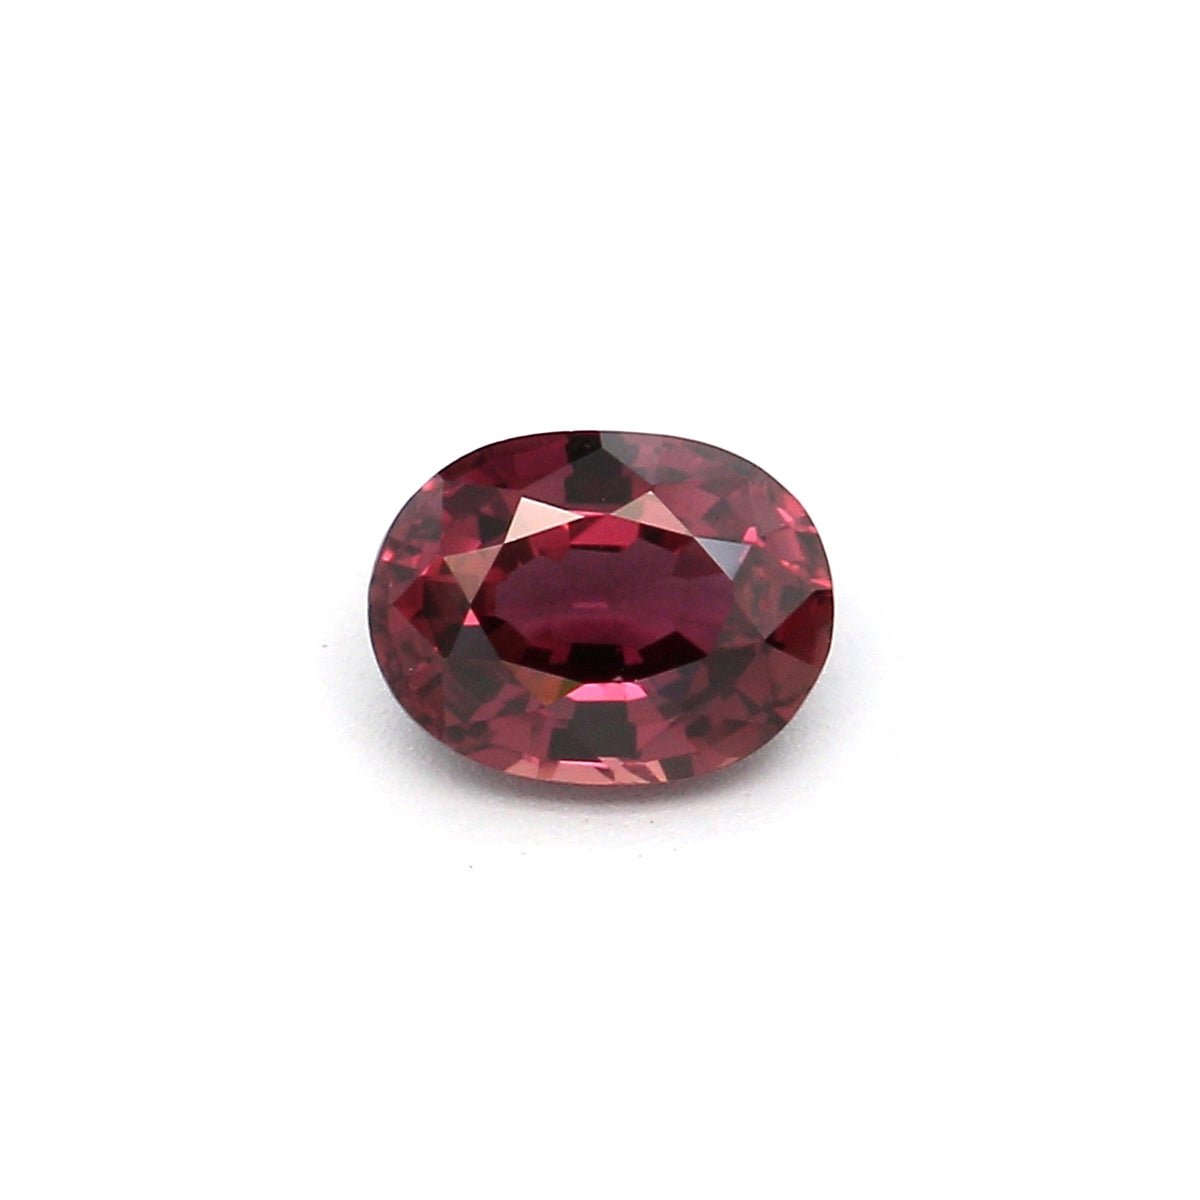 0.44ct Purplish Red, Oval Ruby, Heated, Mozambique - 5.13 x 3.88 x 2.51mm